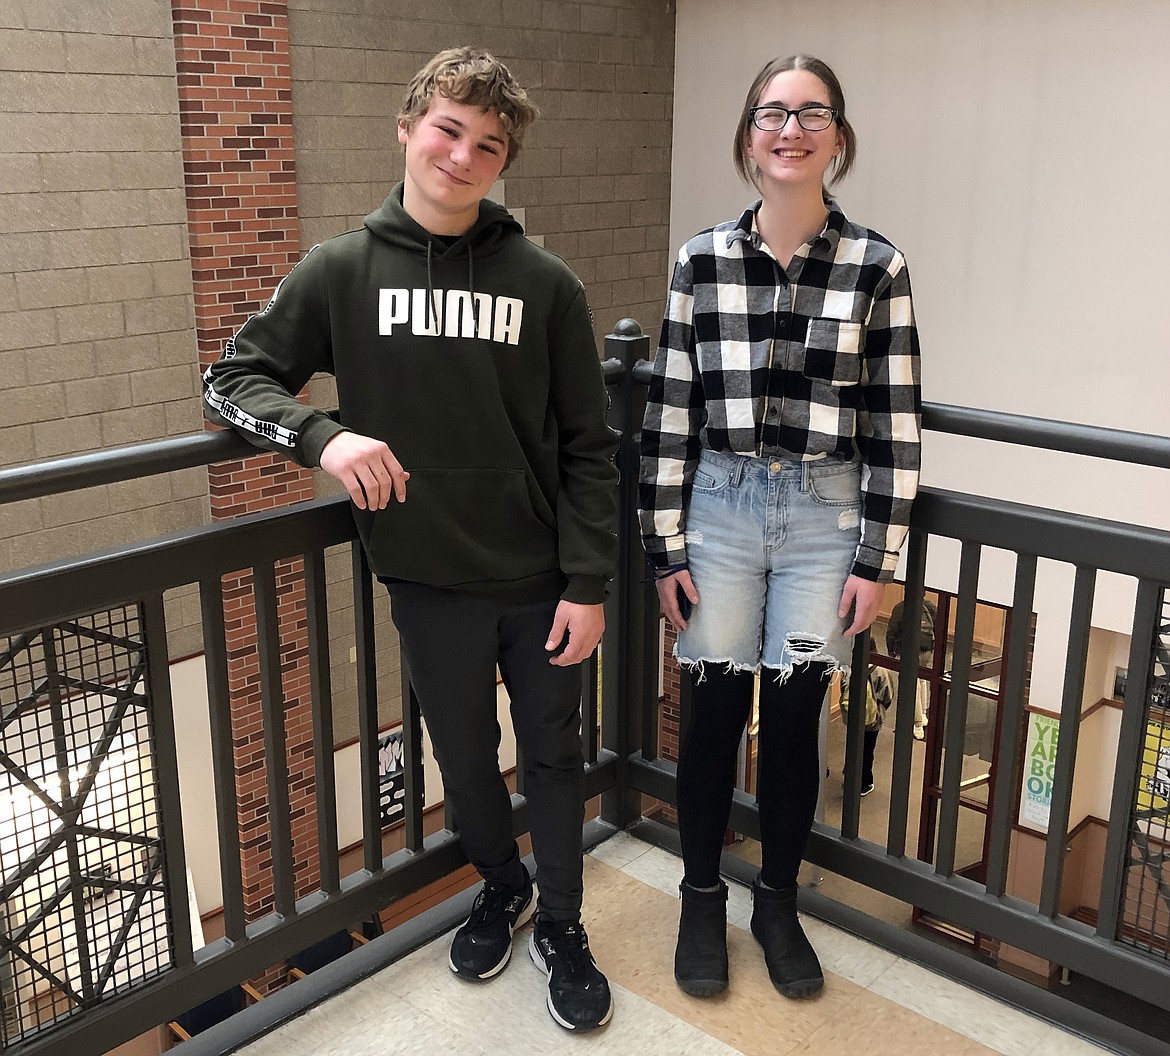 Whitefish Middle School students Sam Nissen and Nora Ide were recently selected for the prestigious All-Northwest choir. (Photo courtesy of Sky Thoreson)